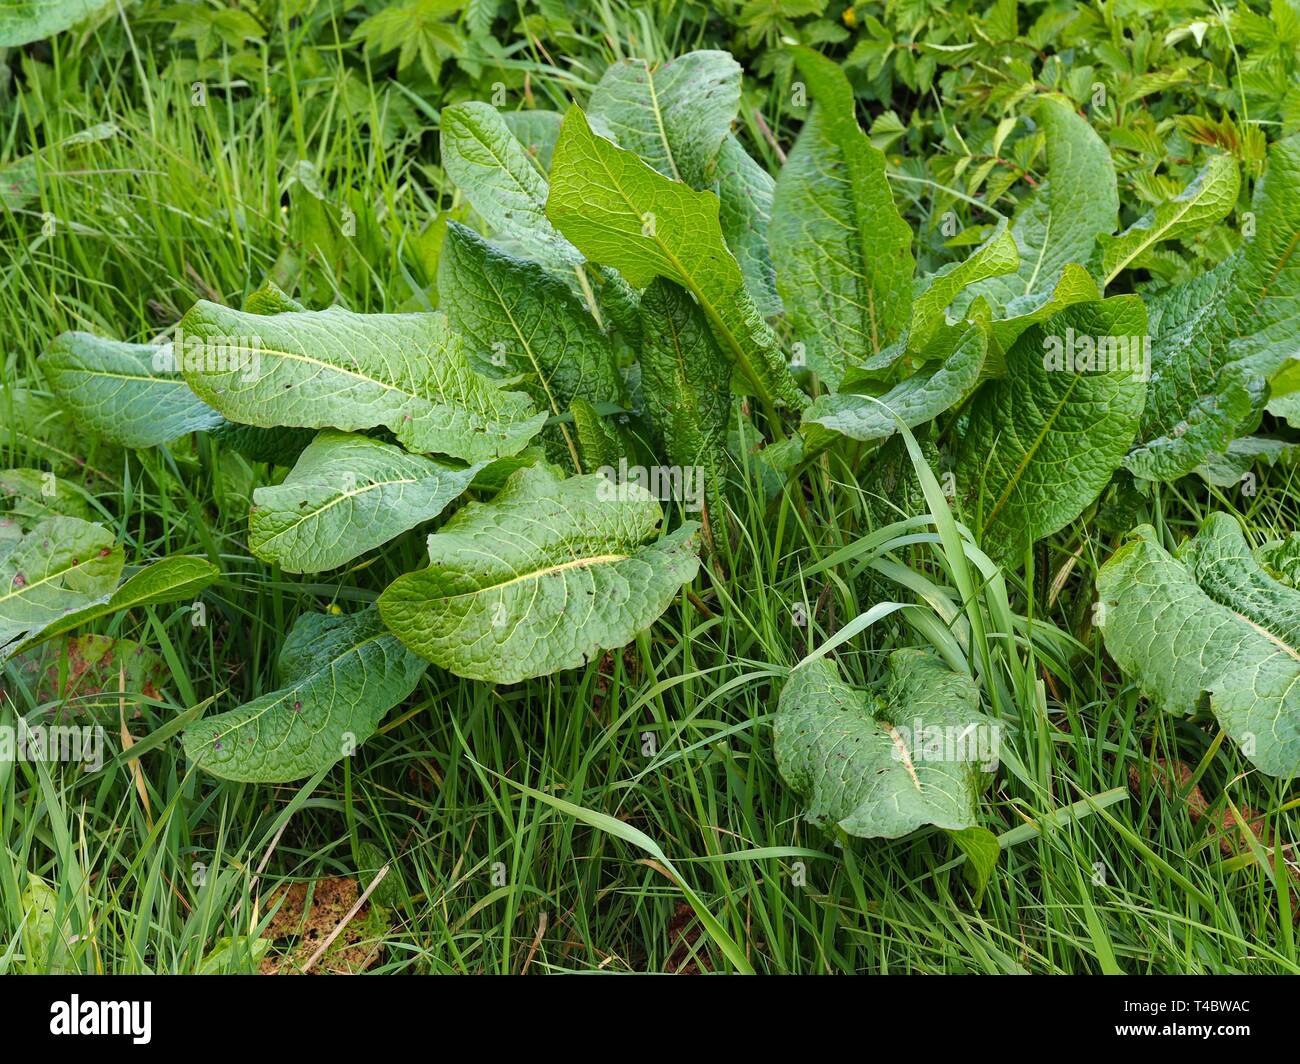 Green dock plant (Rumex obtusifolius) leaves in a grass meadow Stock Photo